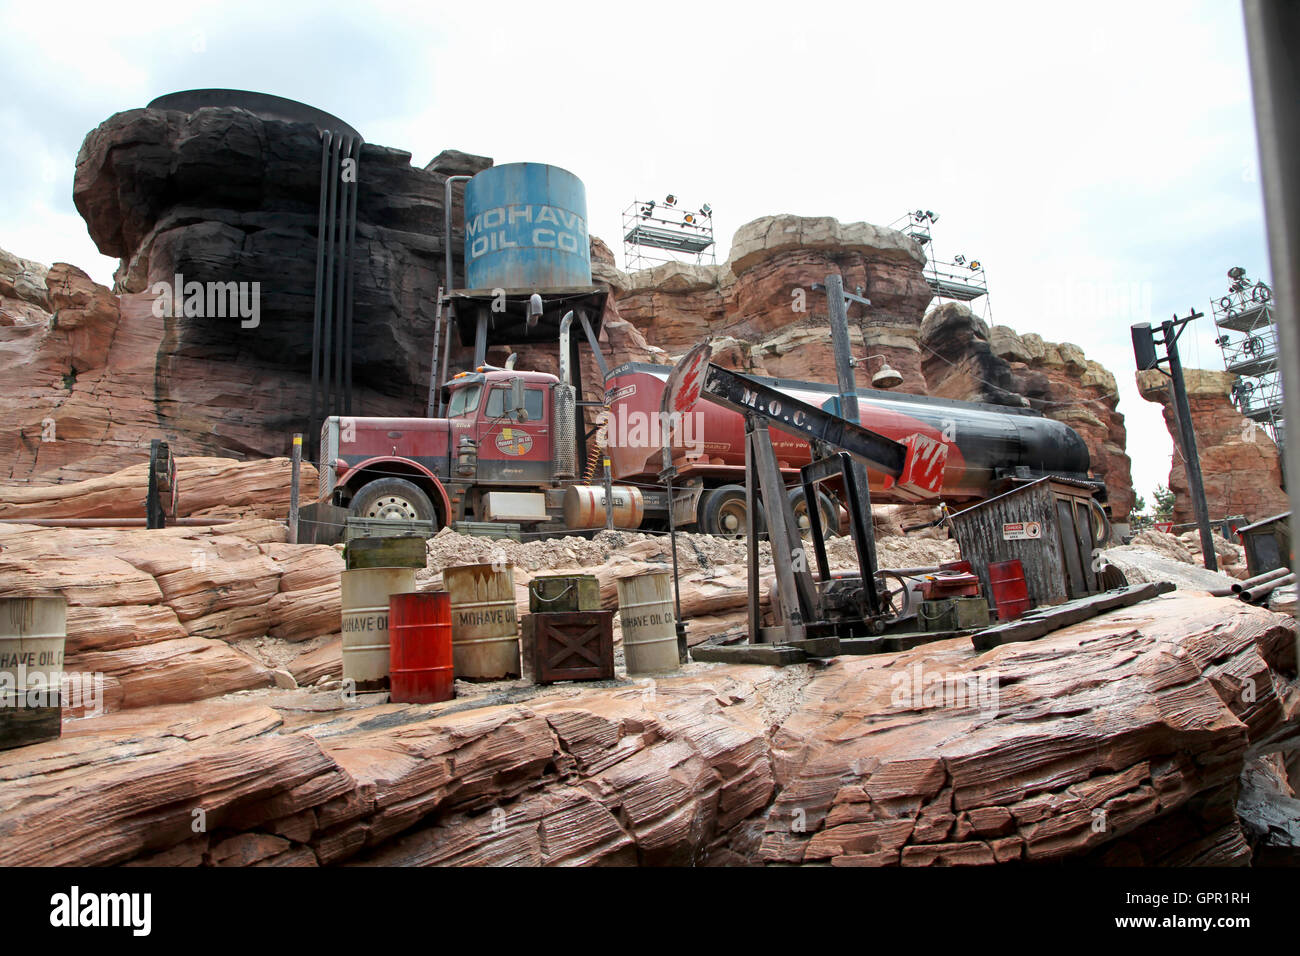 Orlando, Florida. July 1st, 2011. The truck of Catastrophe Canyon on the Backlot Tour, Disney's Hollywood Studios. Stock Photo